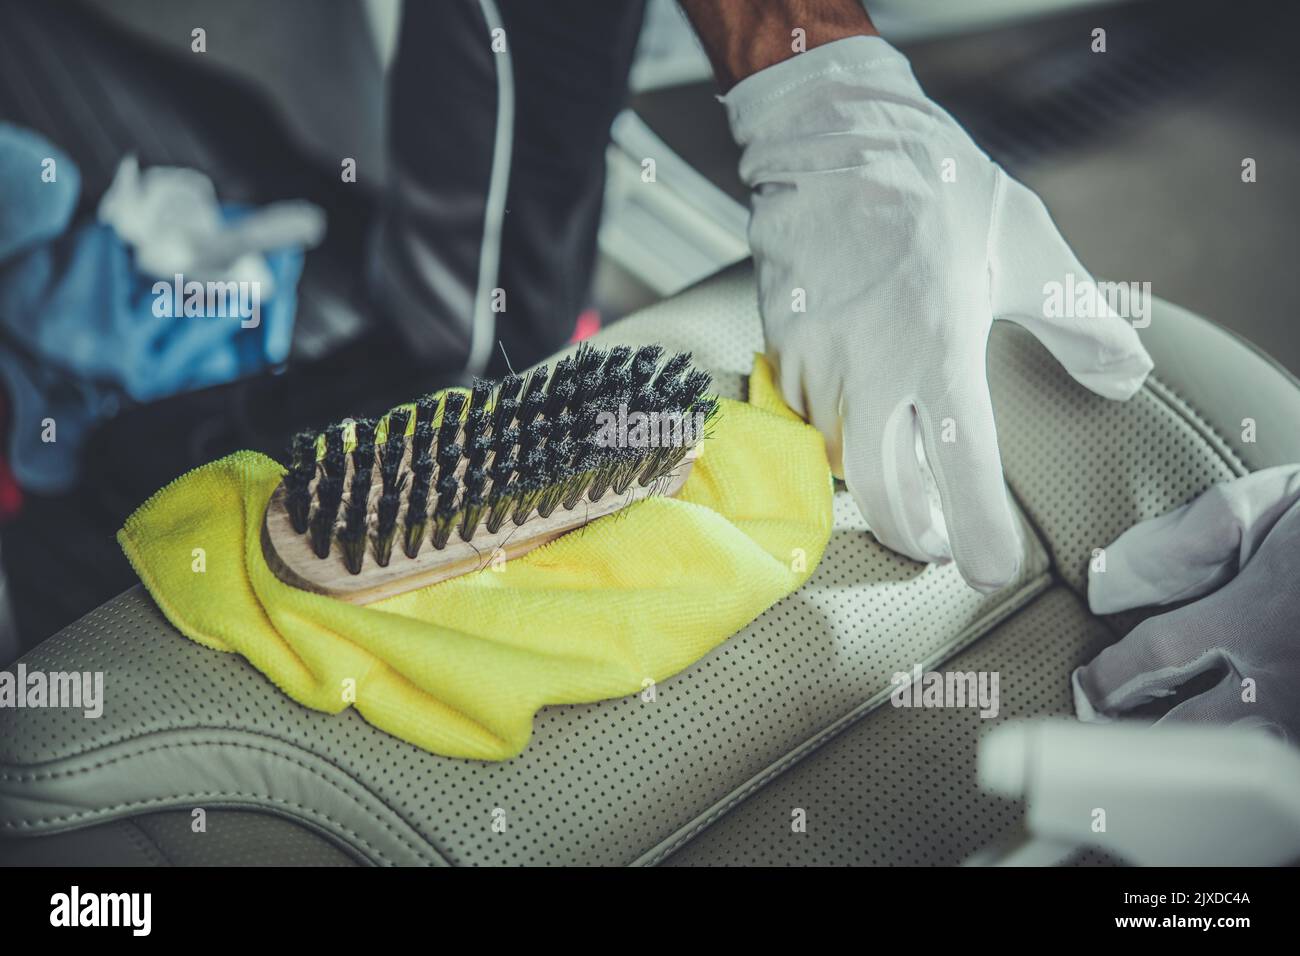 Vehicle Cleaner in White Gloves Precisely Cleaning Car Leather Seats Using Cloth and Brush to Maintain Its Good Looking Interior. Professional Auto De Stock Photo